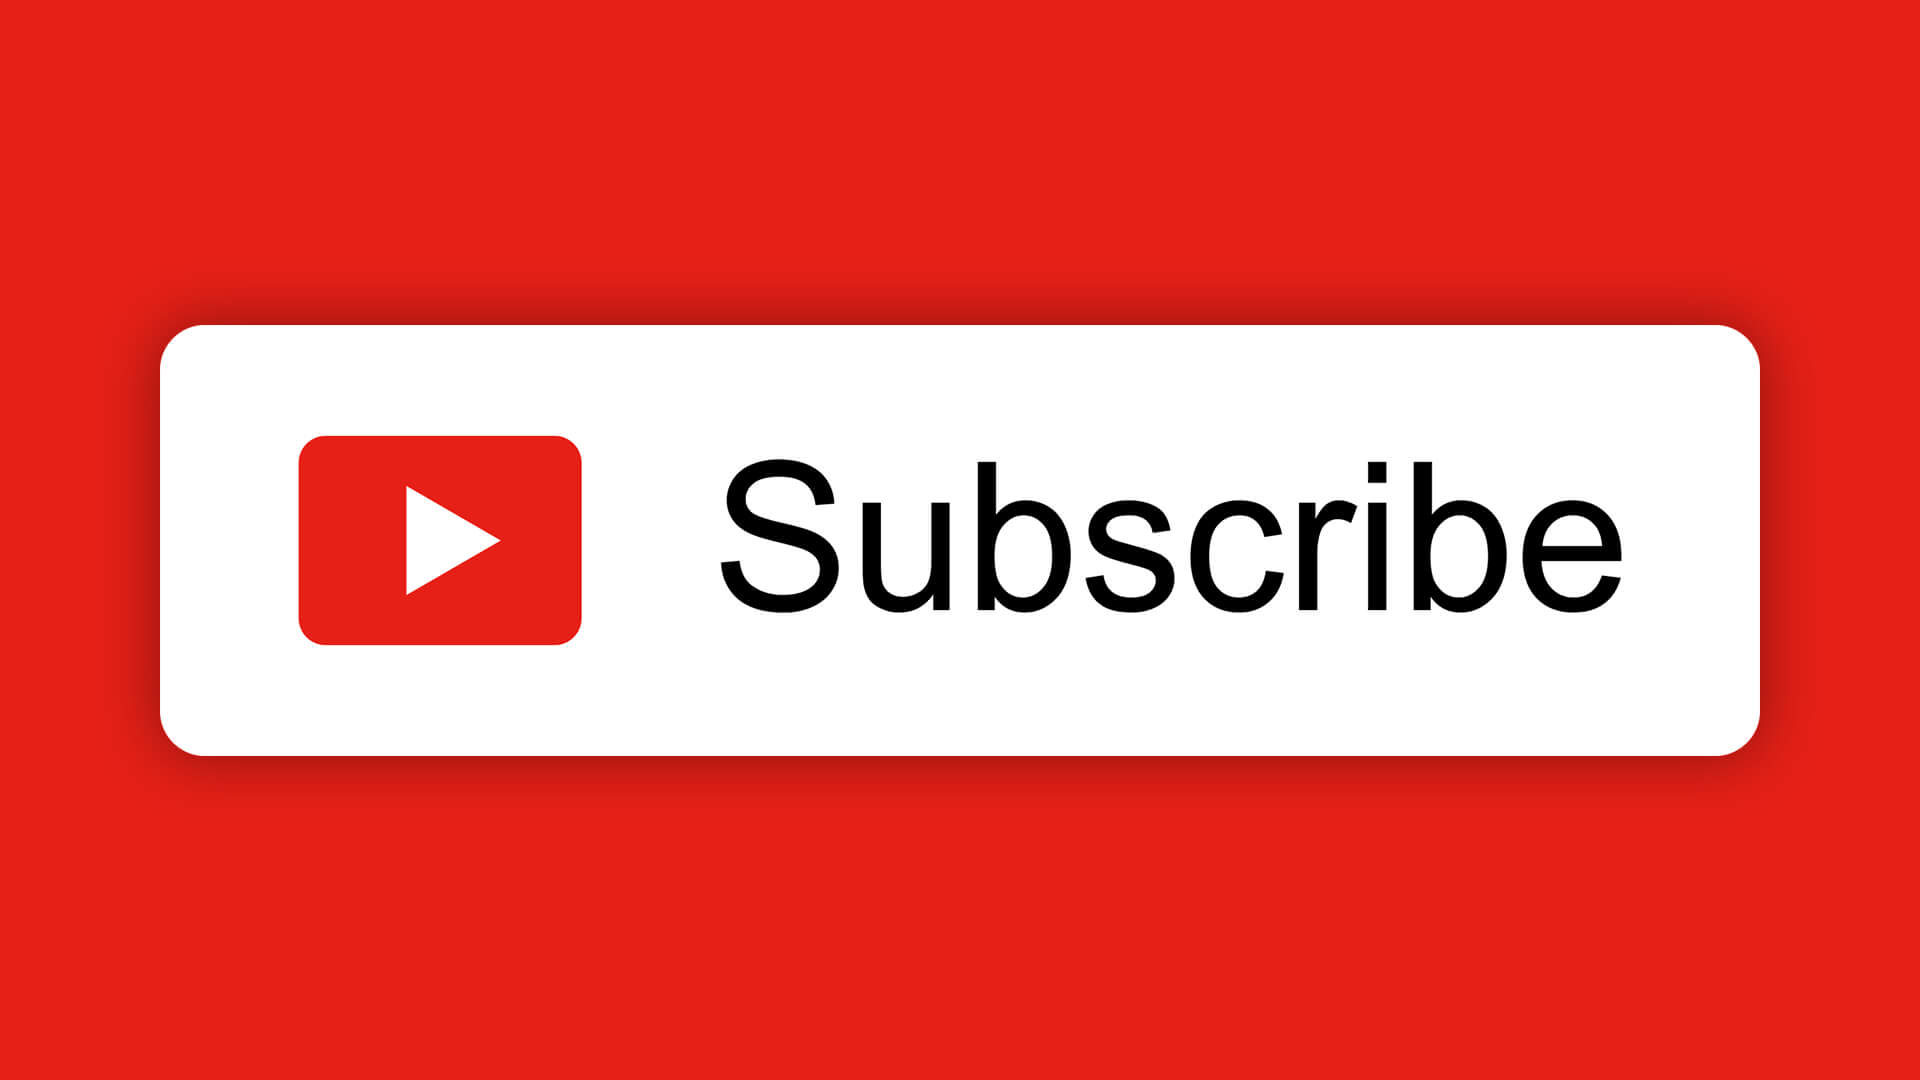 Free YouTube Subscribe Button Download Design Inspiration By AlfredoCreates 3 1